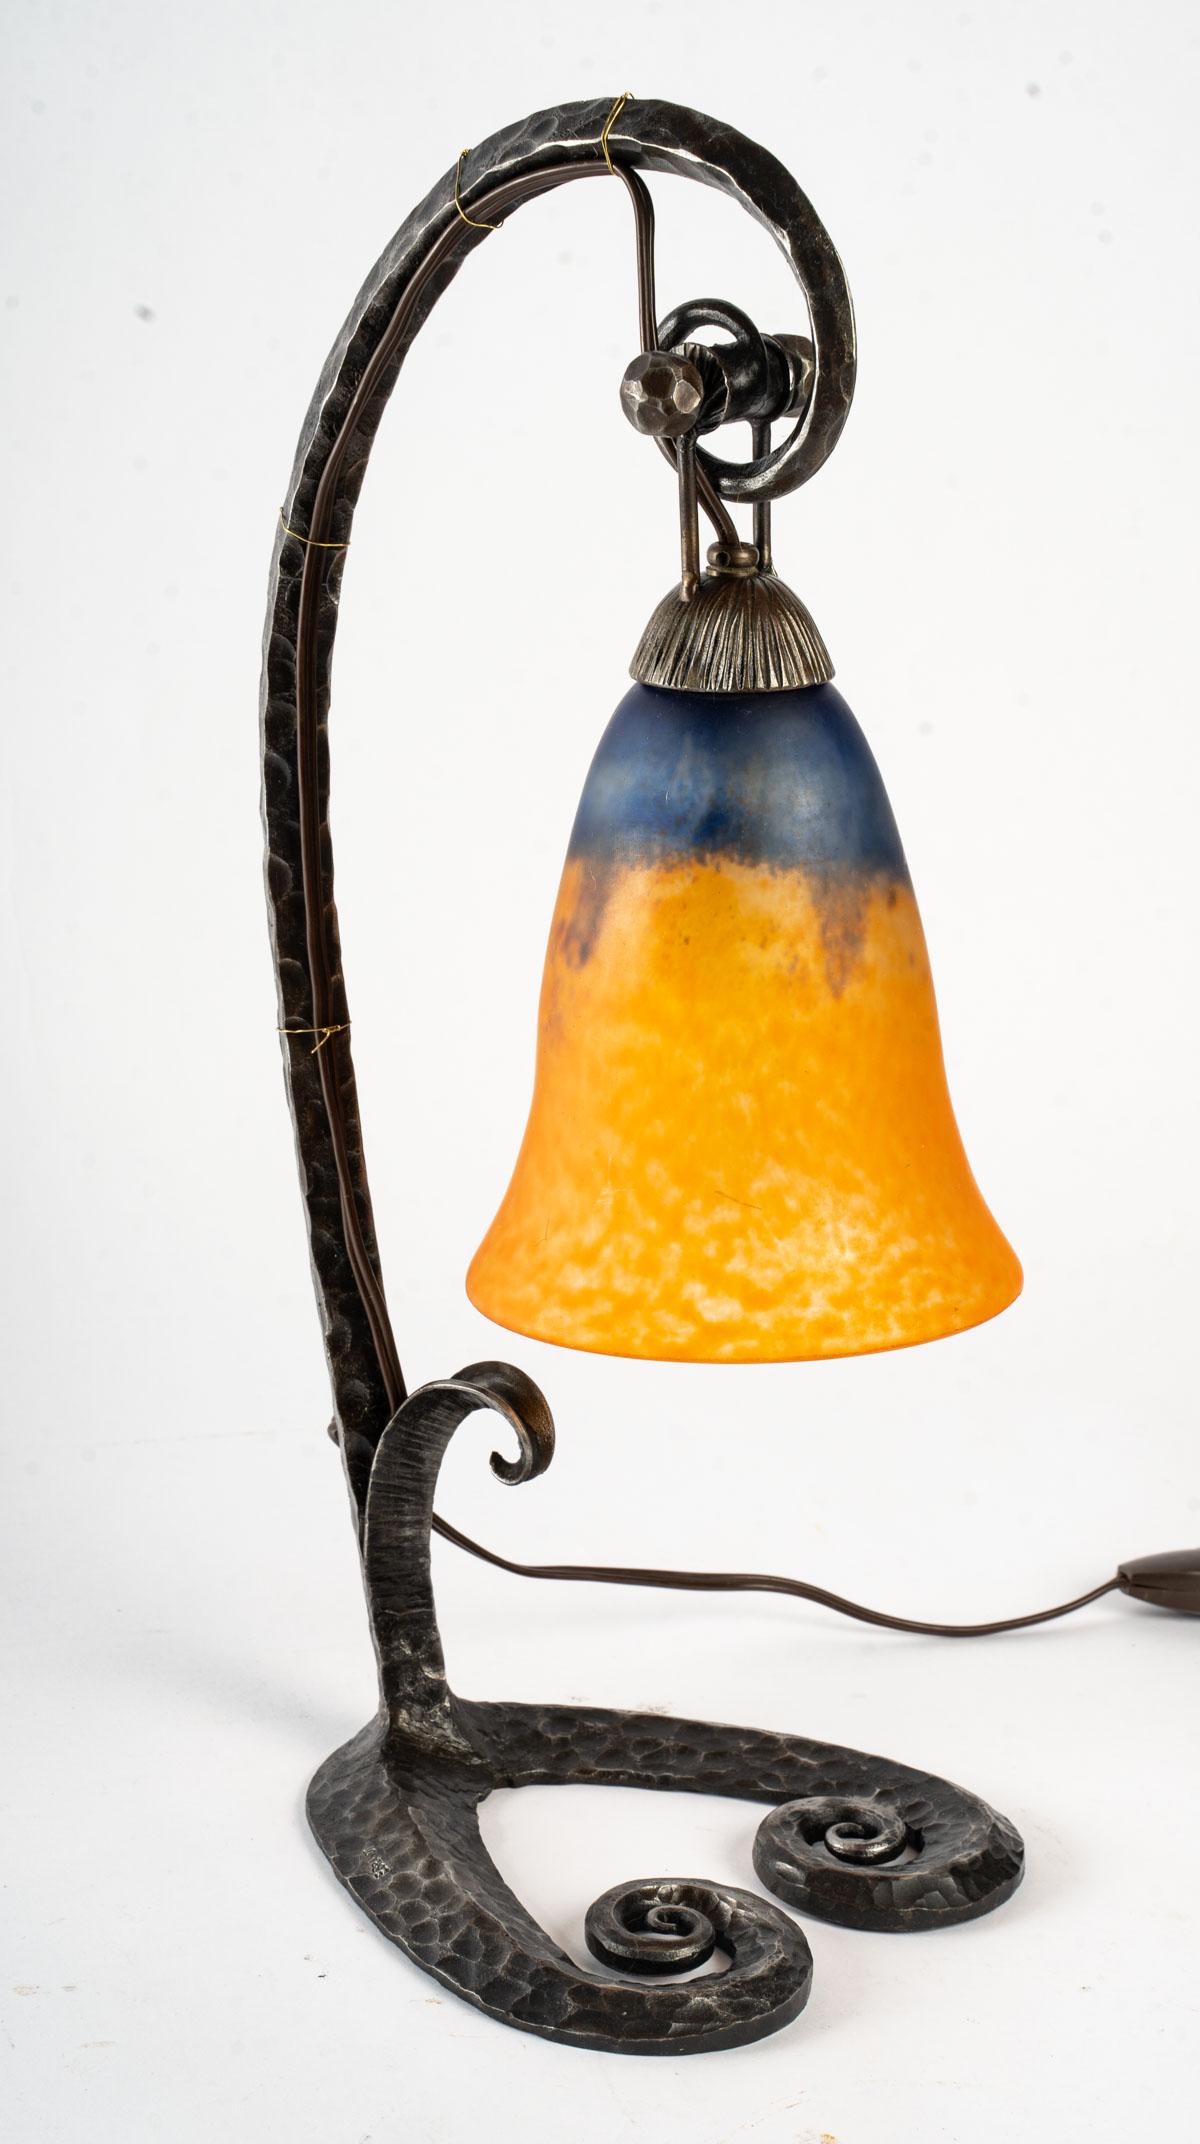 Lamp E. Brandt and Daum. Wrought iron base, signed E. Brandt. Bulb cover in red and blue glass paste, signed DAUM Nancy.
Measures: H: 42 cm, W: 22 cm.